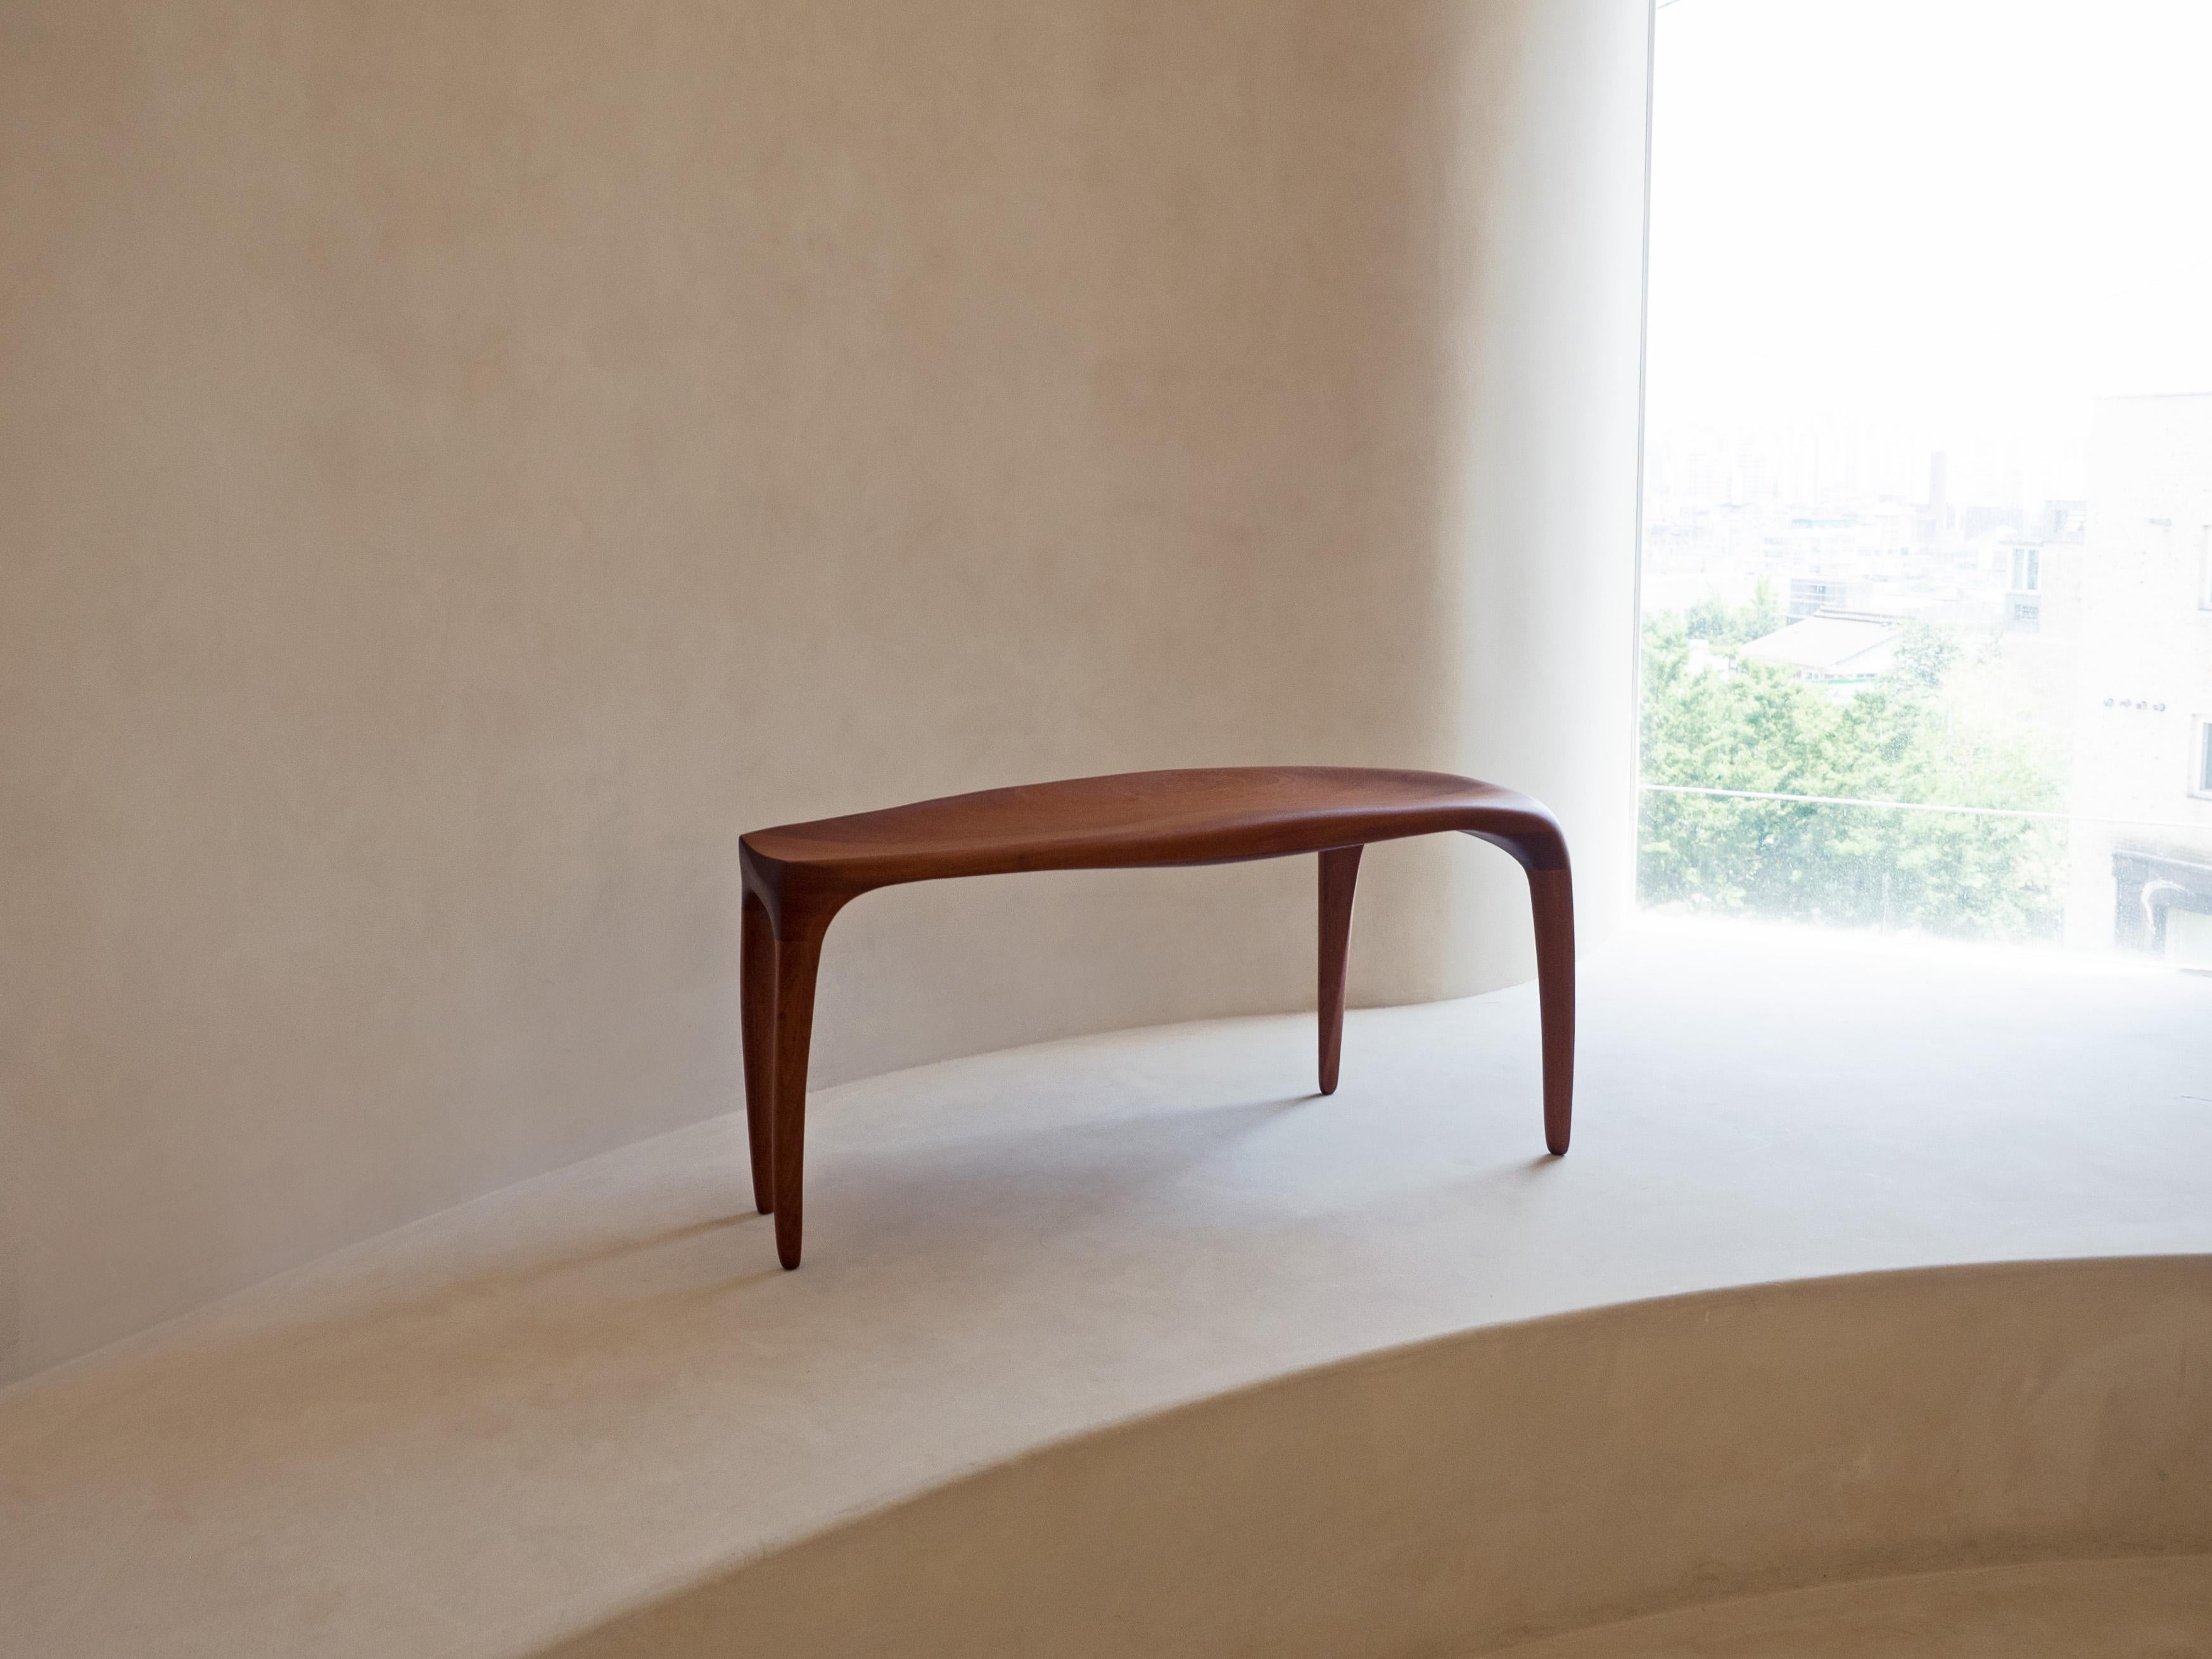 'Motion Bench' by Soo Joo is a sculptural wooden bench in Organic Modernism style. The artist creatively reimagines the essence of traditional Korean aesthetics into a modern minimal context. 

Motion bench is carved out of stack-laminated Sapele